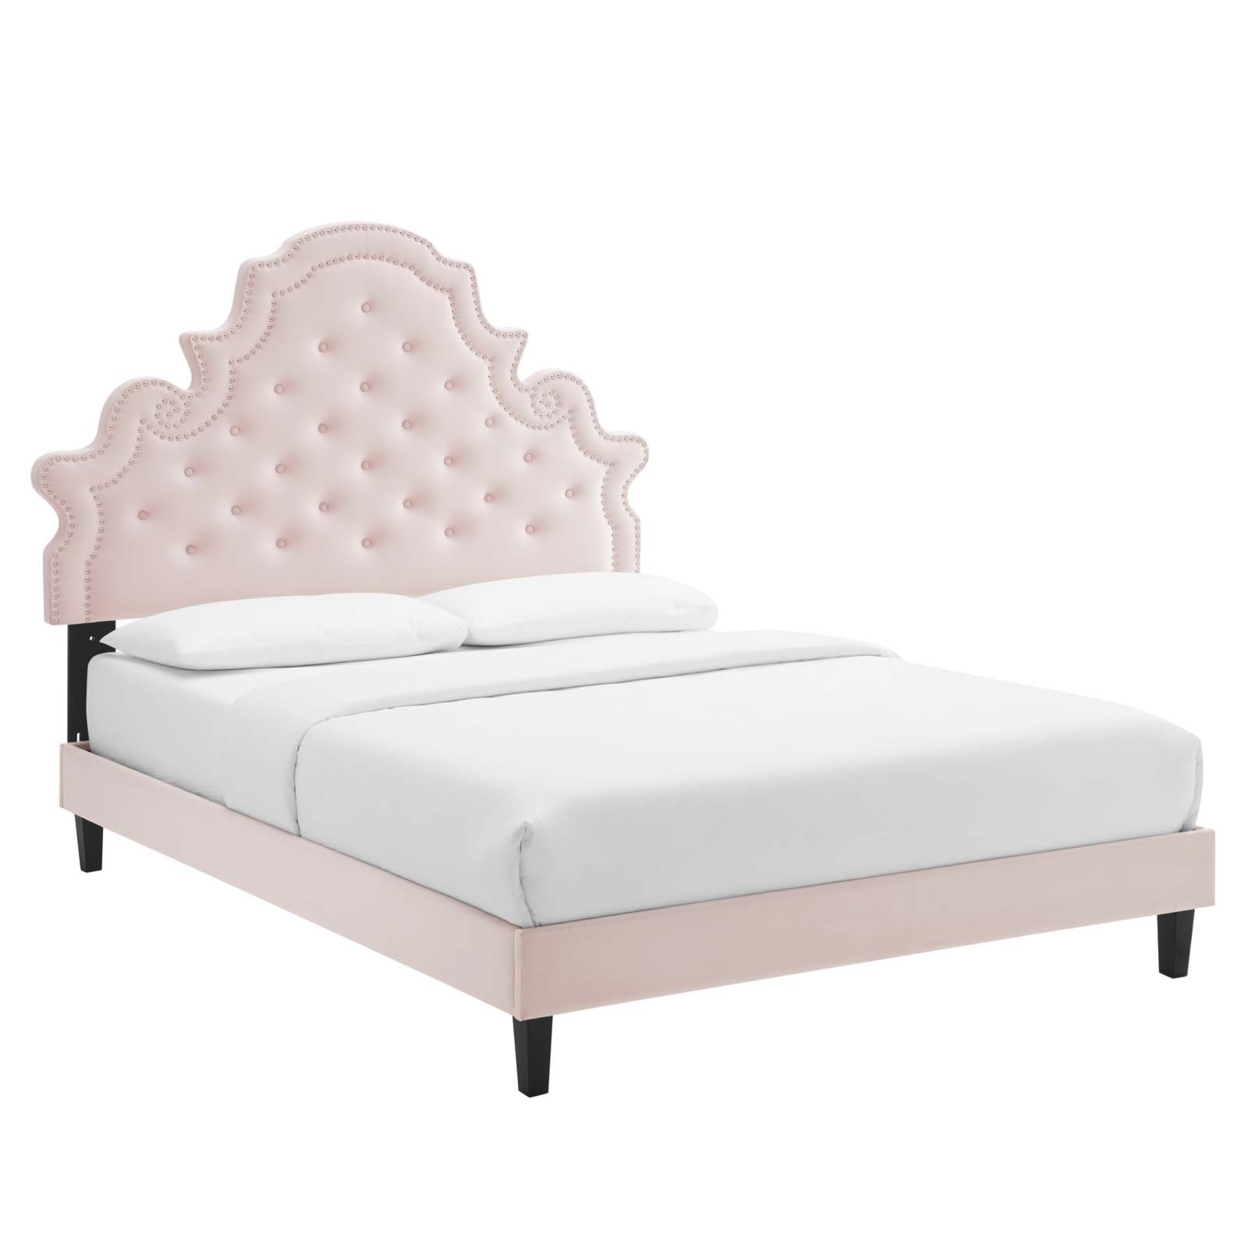 Fabric Upholstered Full Size Tufted Bed With Tapered Wood Legs, Light Pink